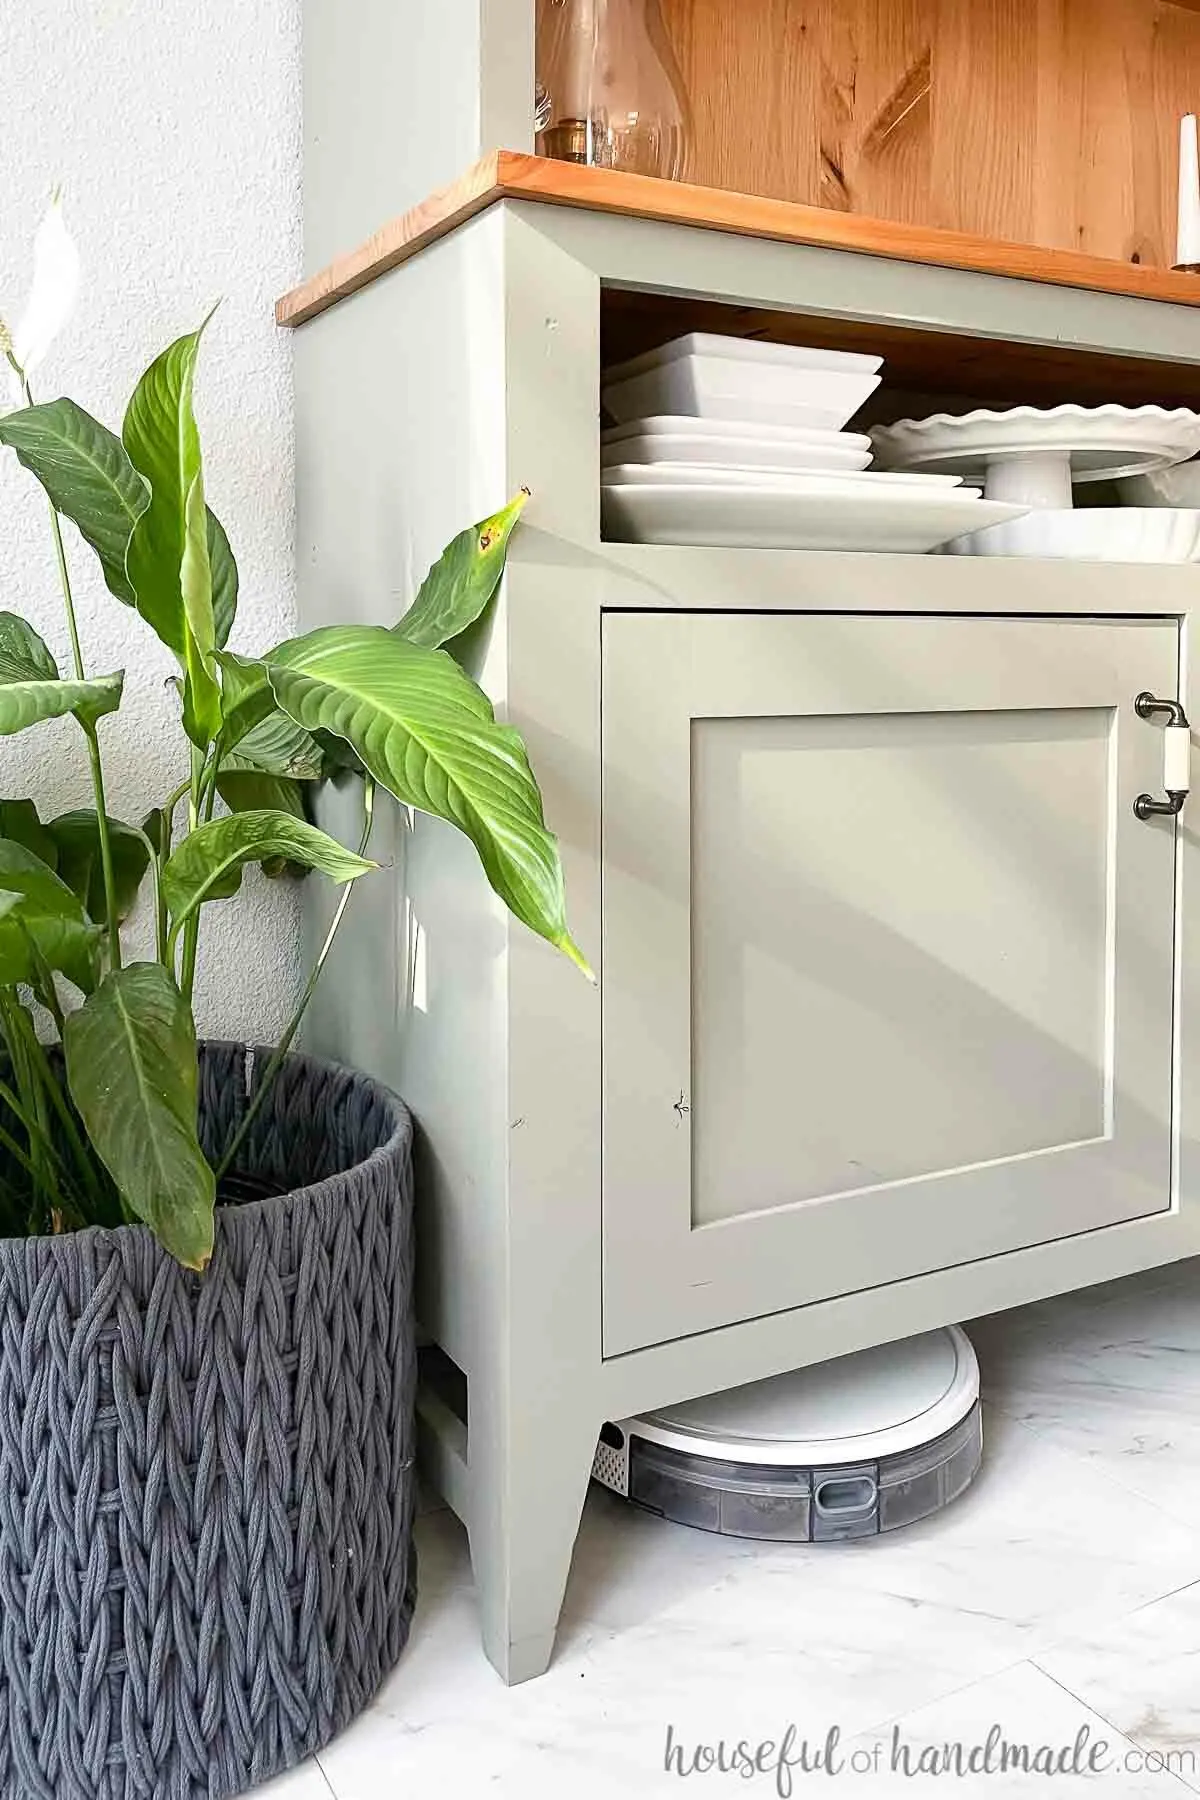 Green painted hutch with large clearance below to store a robot vacuum for charging with a plant next to it.